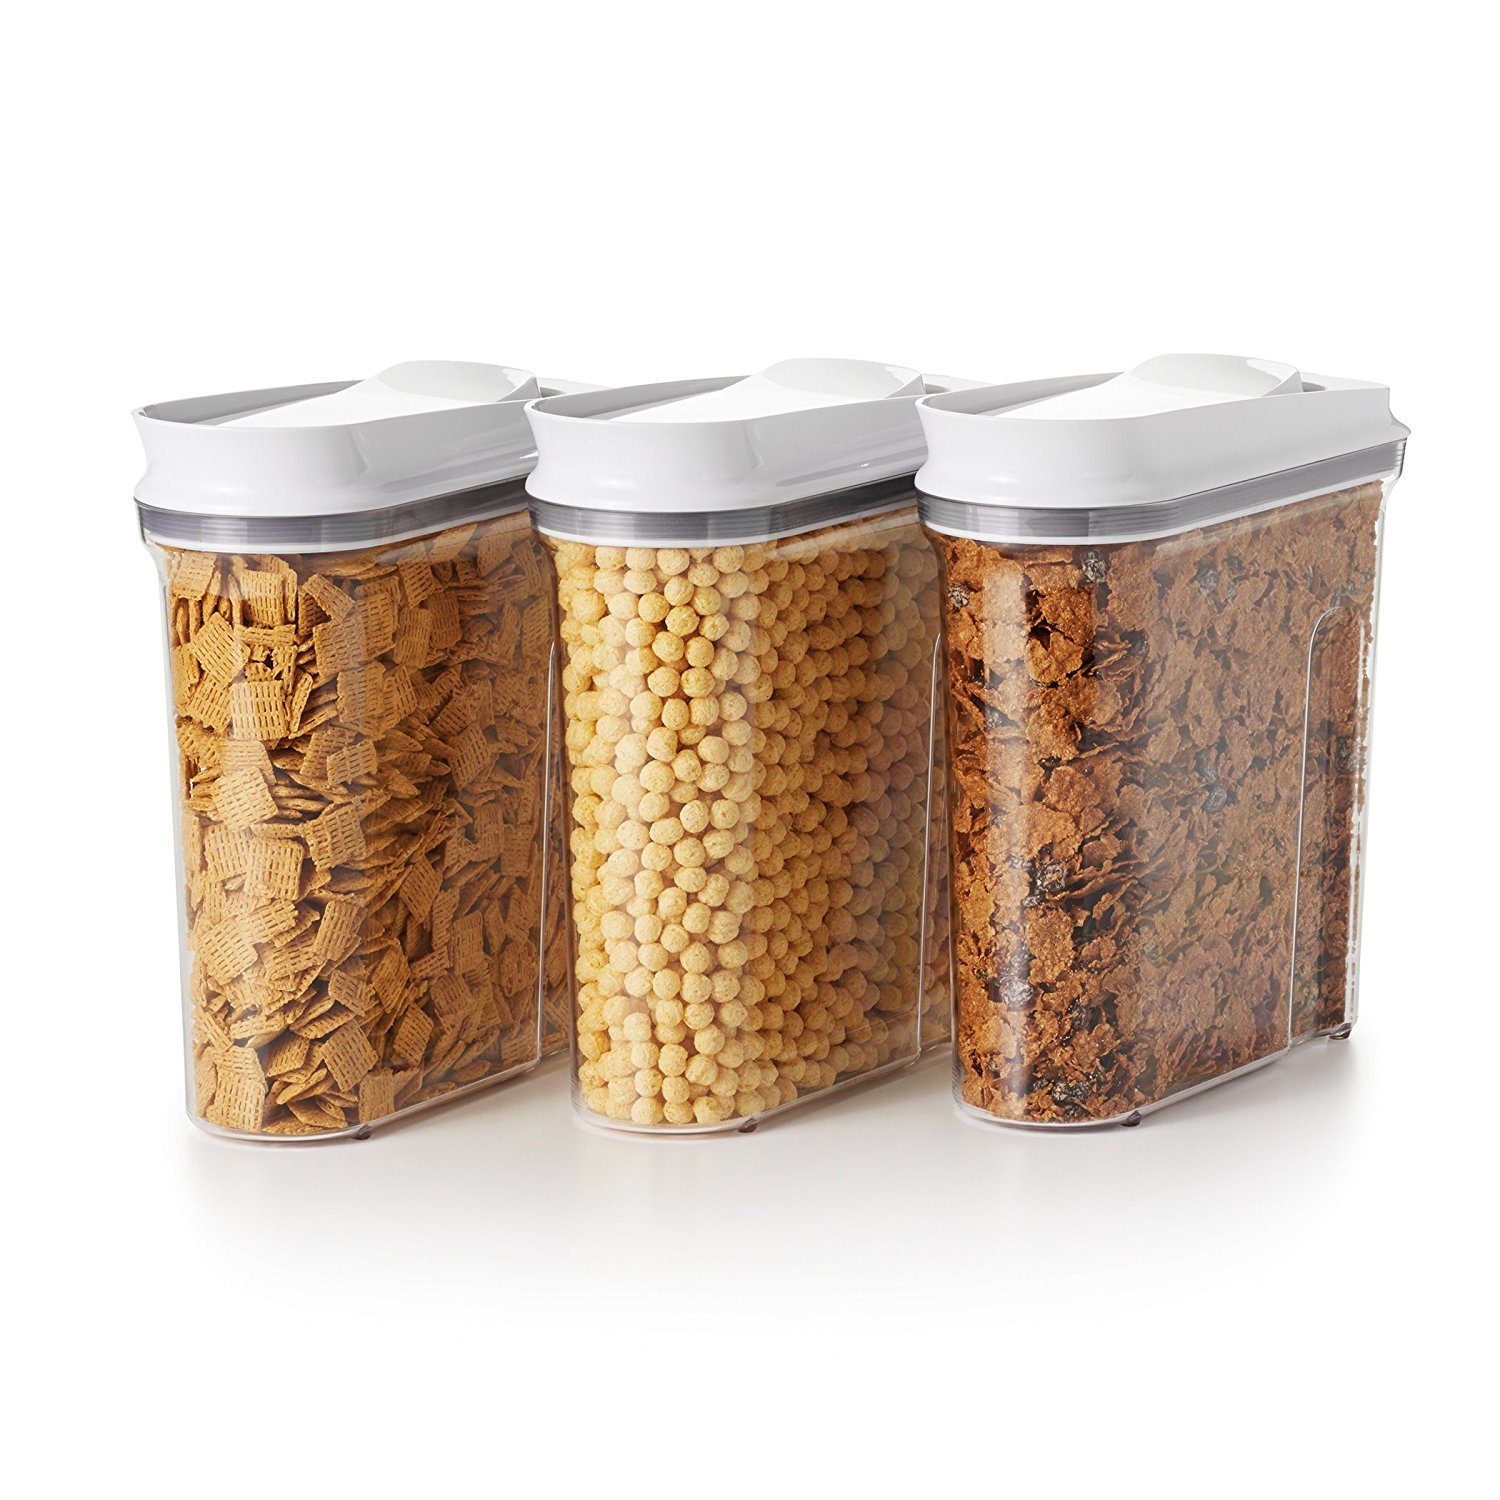 https://www.dontwasteyourmoney.com/wp-content/uploads/2020/05/oxo-good-grips-airtight-pop-cereal-dispenser-set-3-piece-cereal-container.jpg